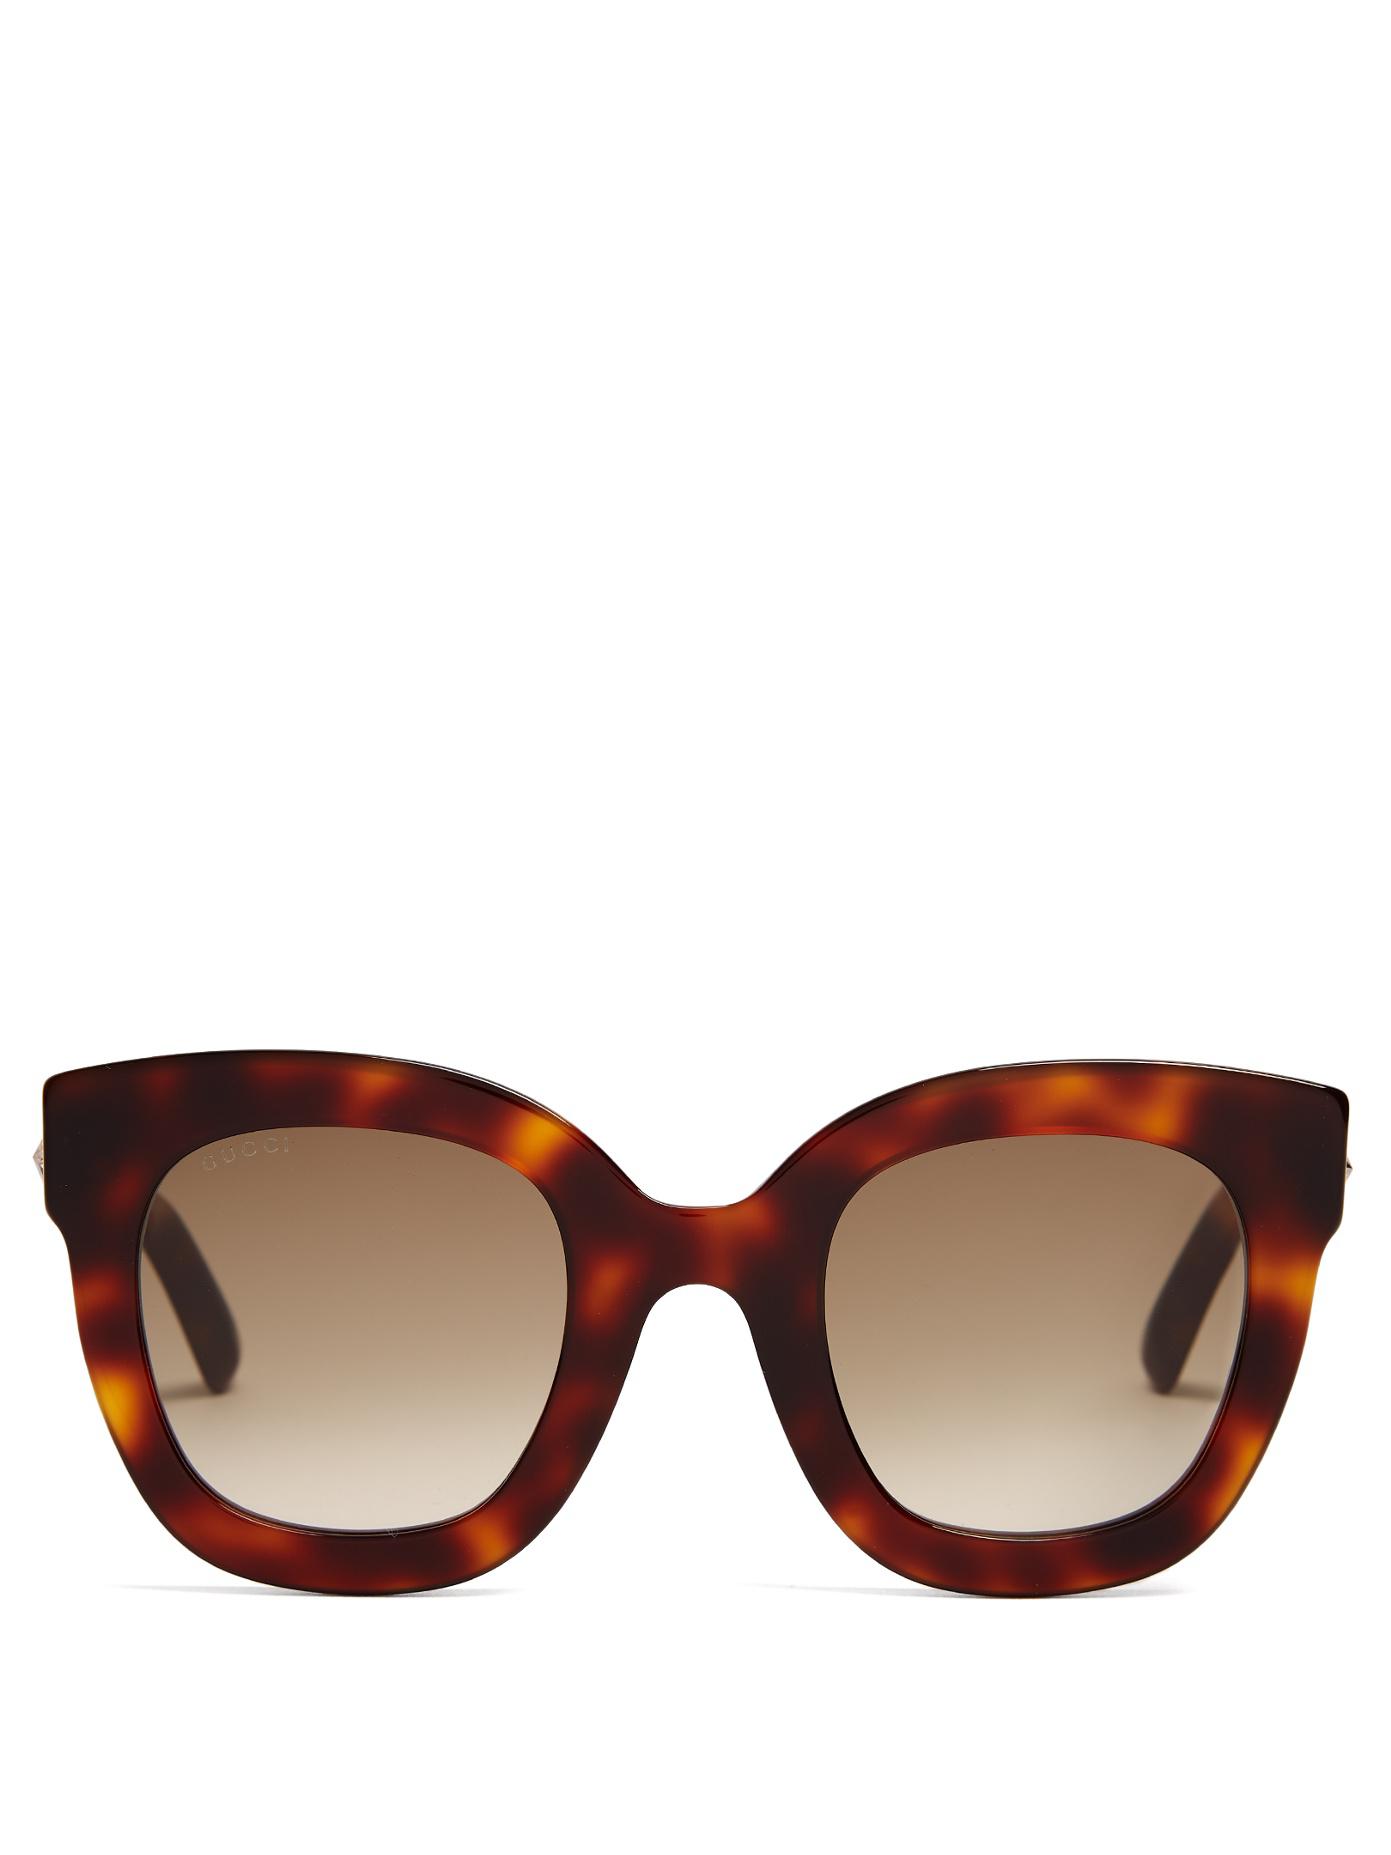 Gucci Star-embellished Square-frame Sunglasses in Brown - Lyst